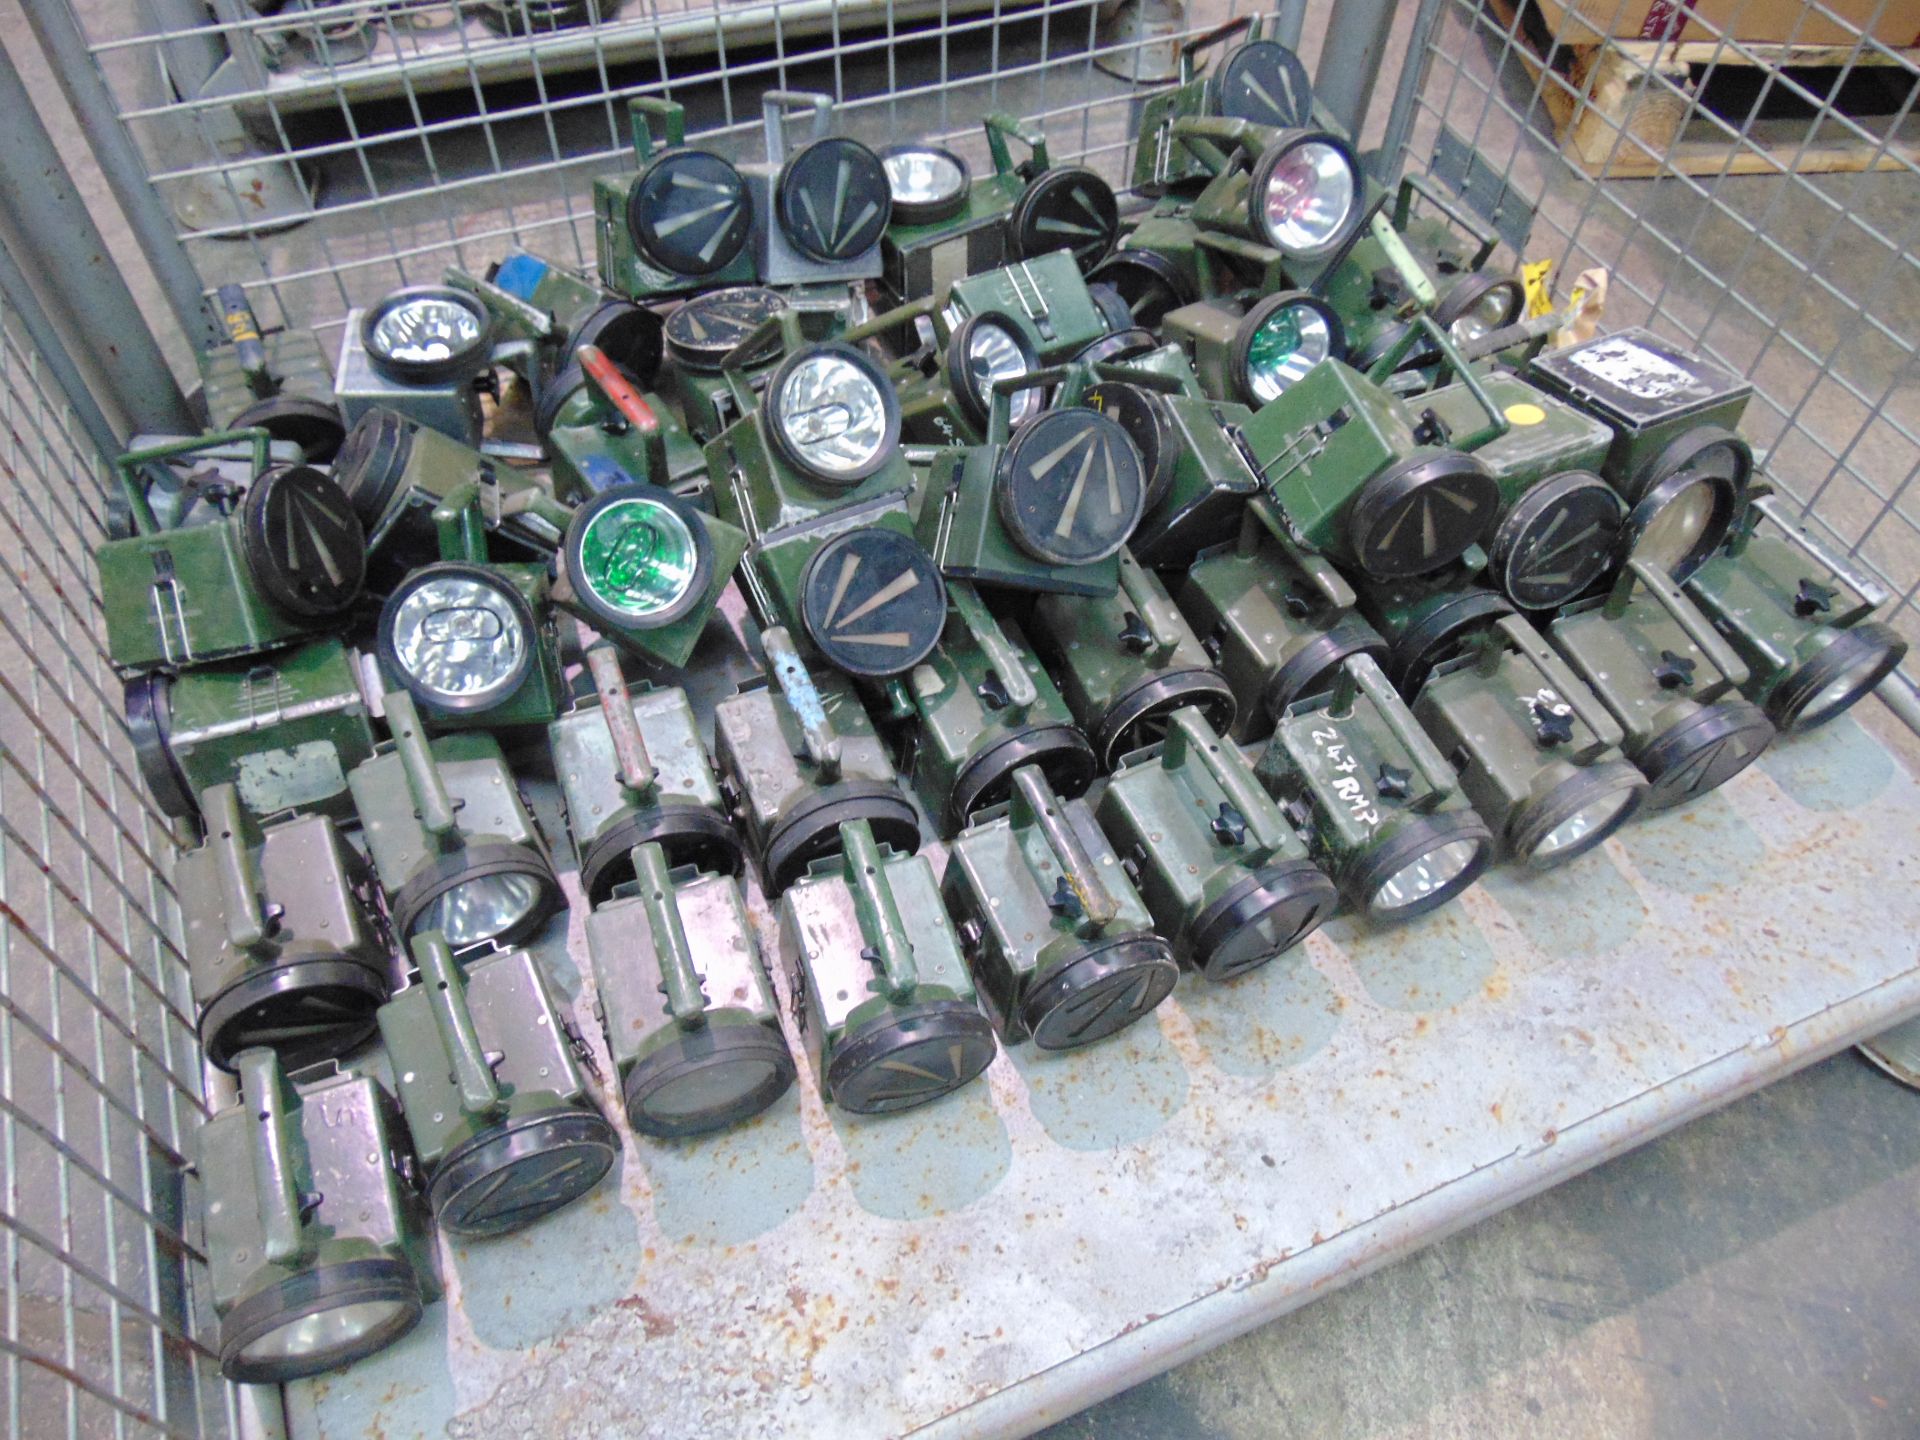 Stillage of Approximately 50 x Signal Lamps